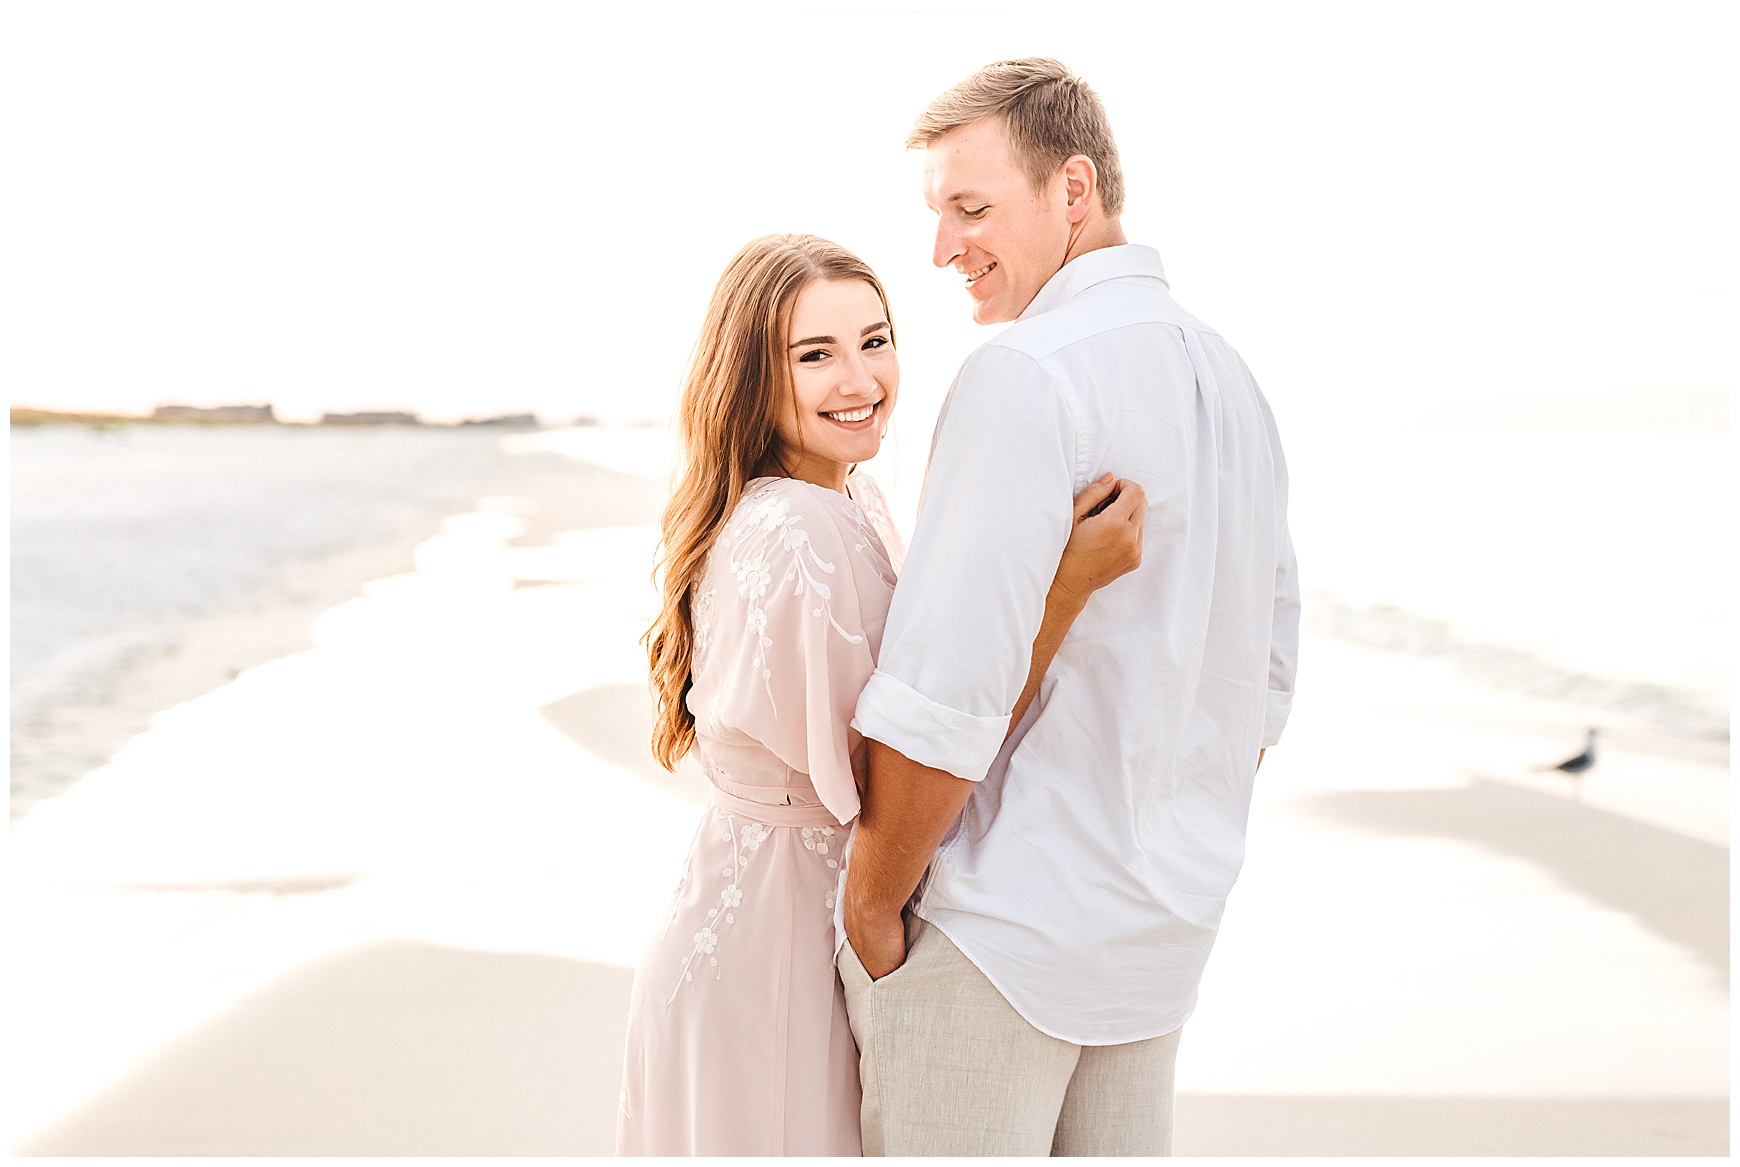 Engagement Session at the beach in Destin 30a